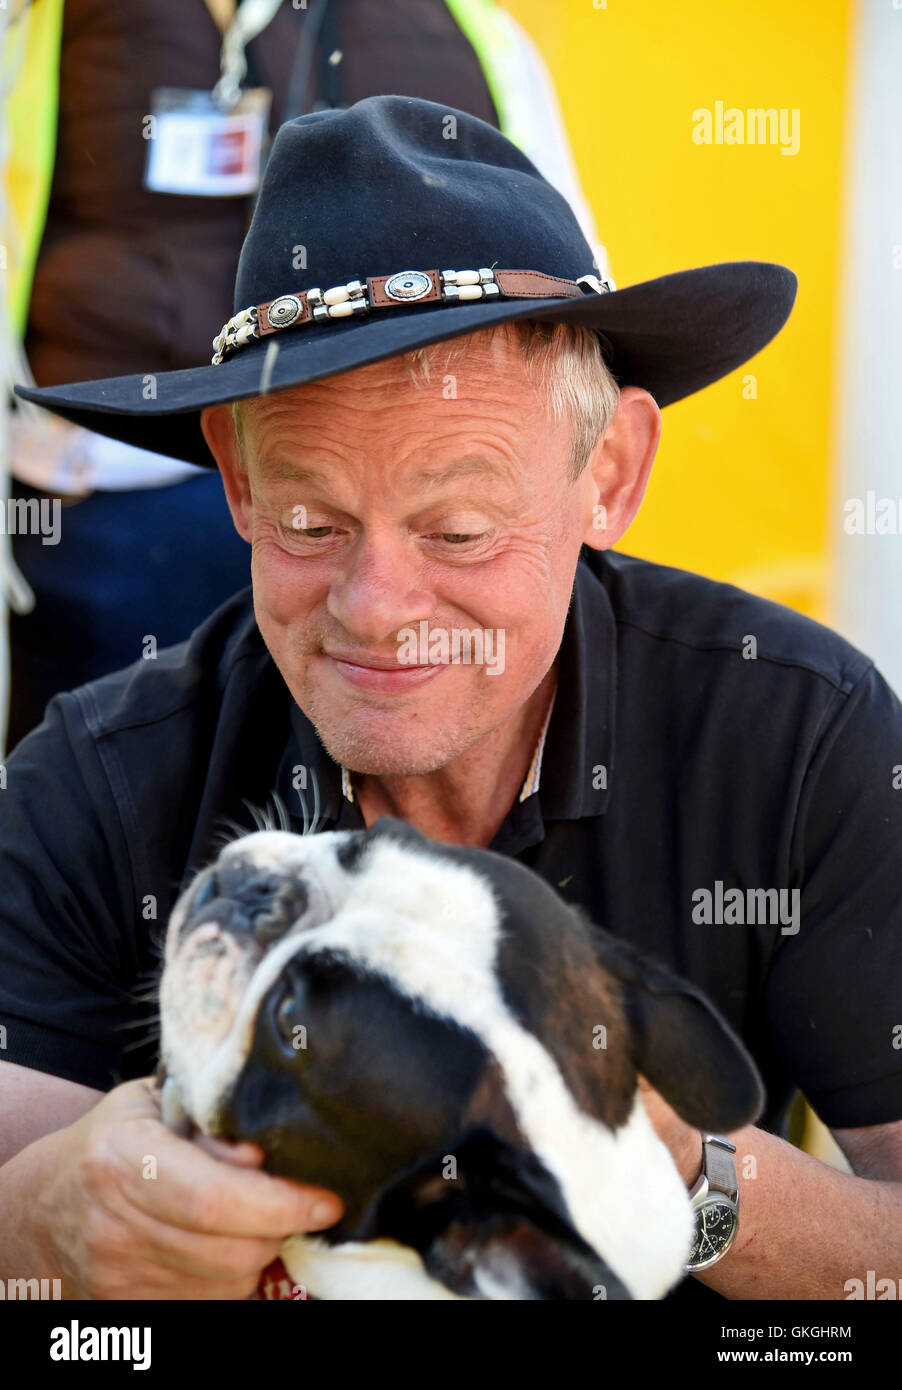 Martin clunes martin clunes hi-res stock photography and images image